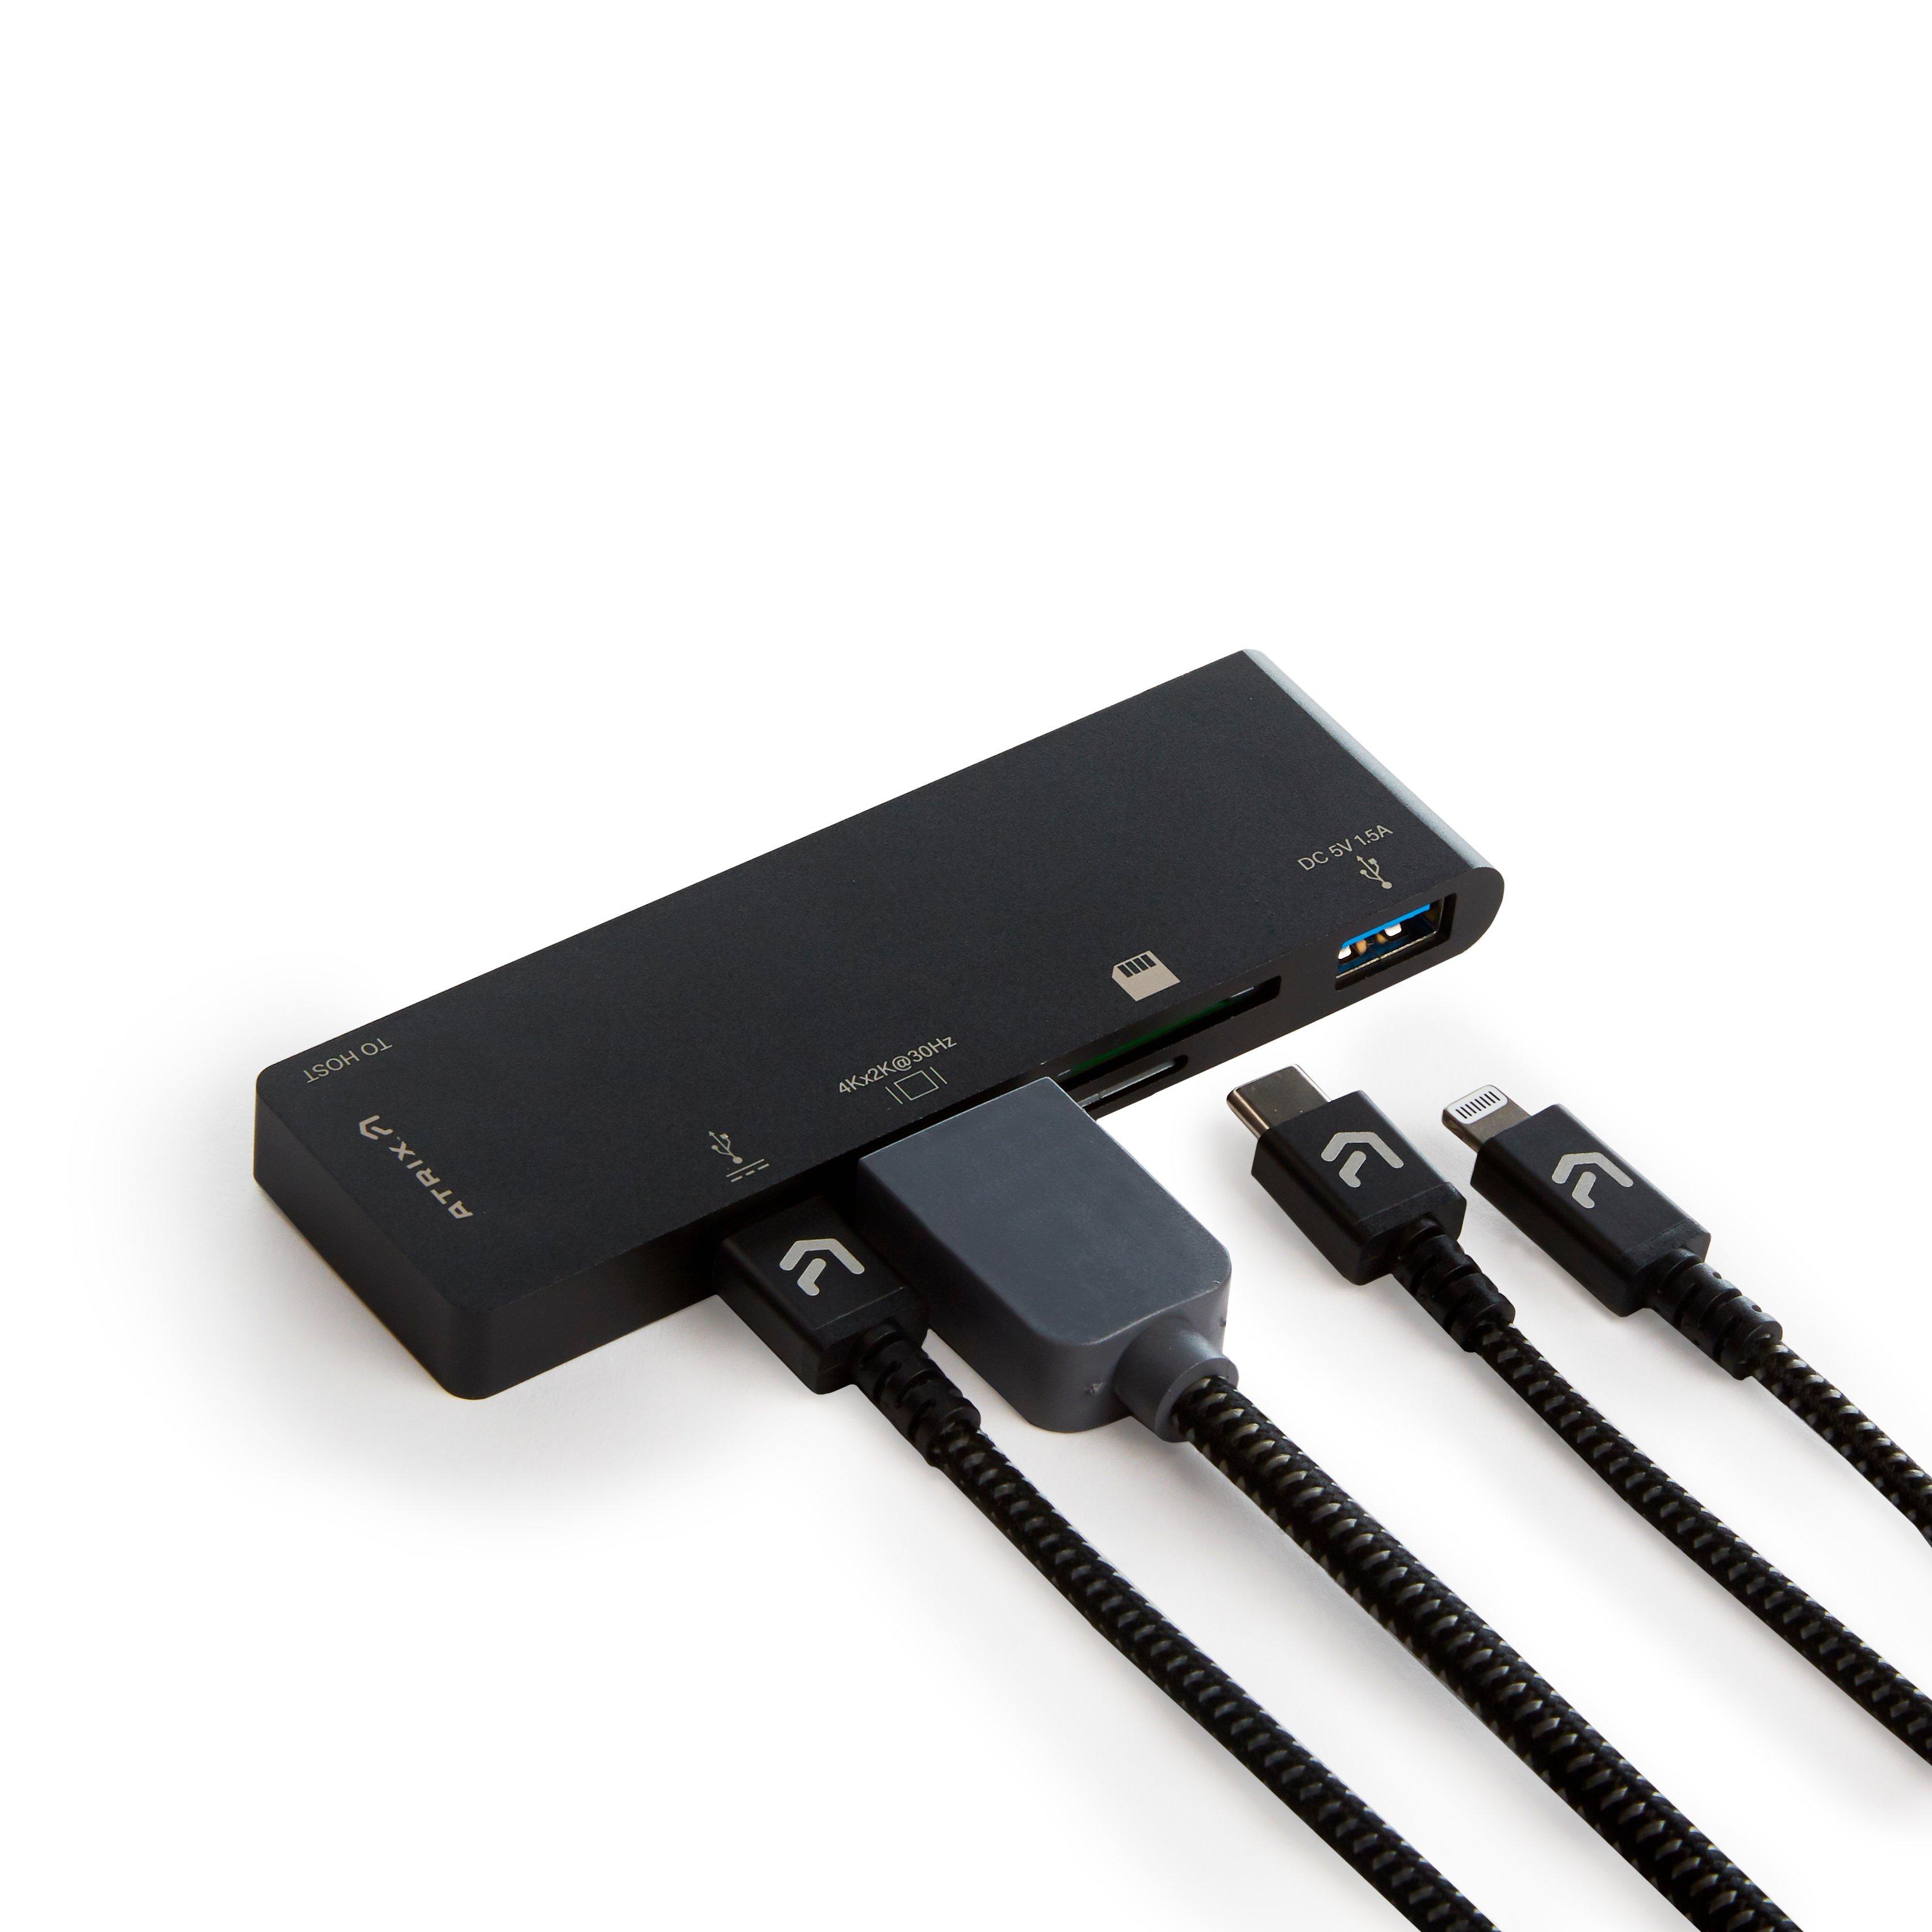 5 Port USB hub with powered MicroUSB port - USB or USB-C version available